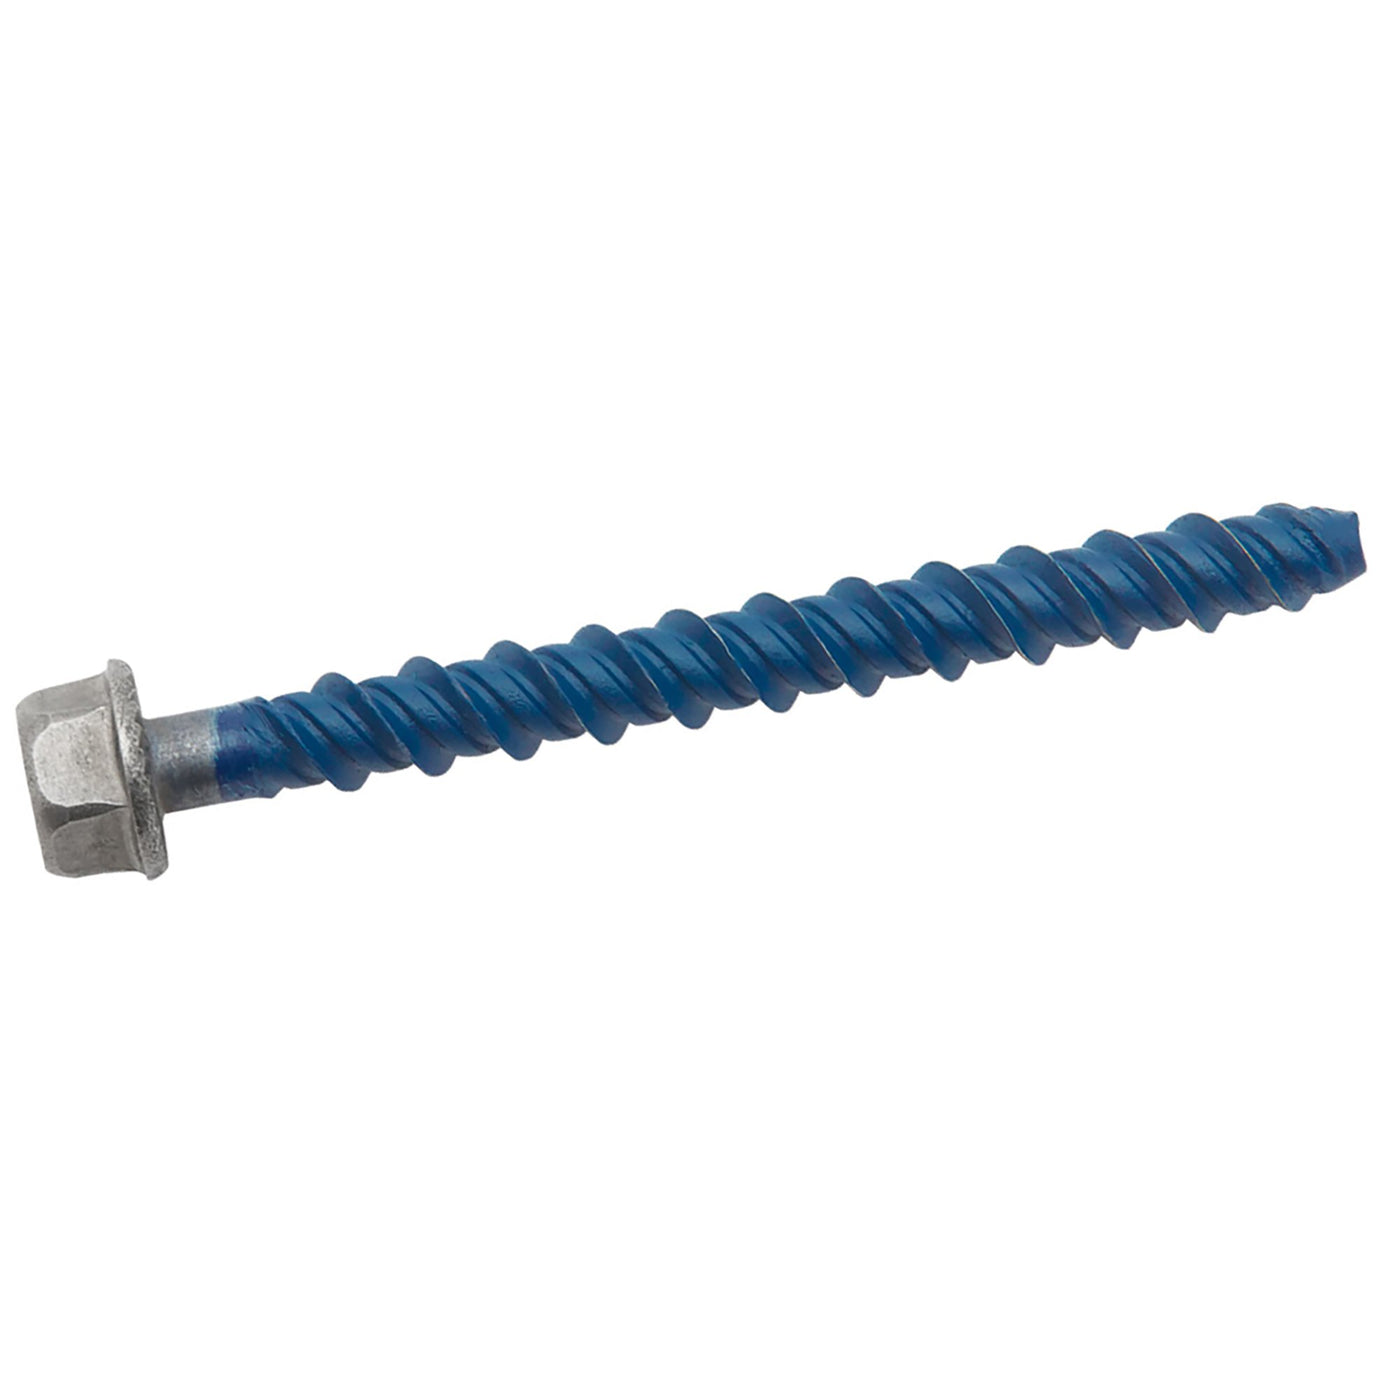 1/2 x 4 Powers Wedge-Bolts®+ Concrete Anchor 316 Stainless Steel Bimetal ( 50)